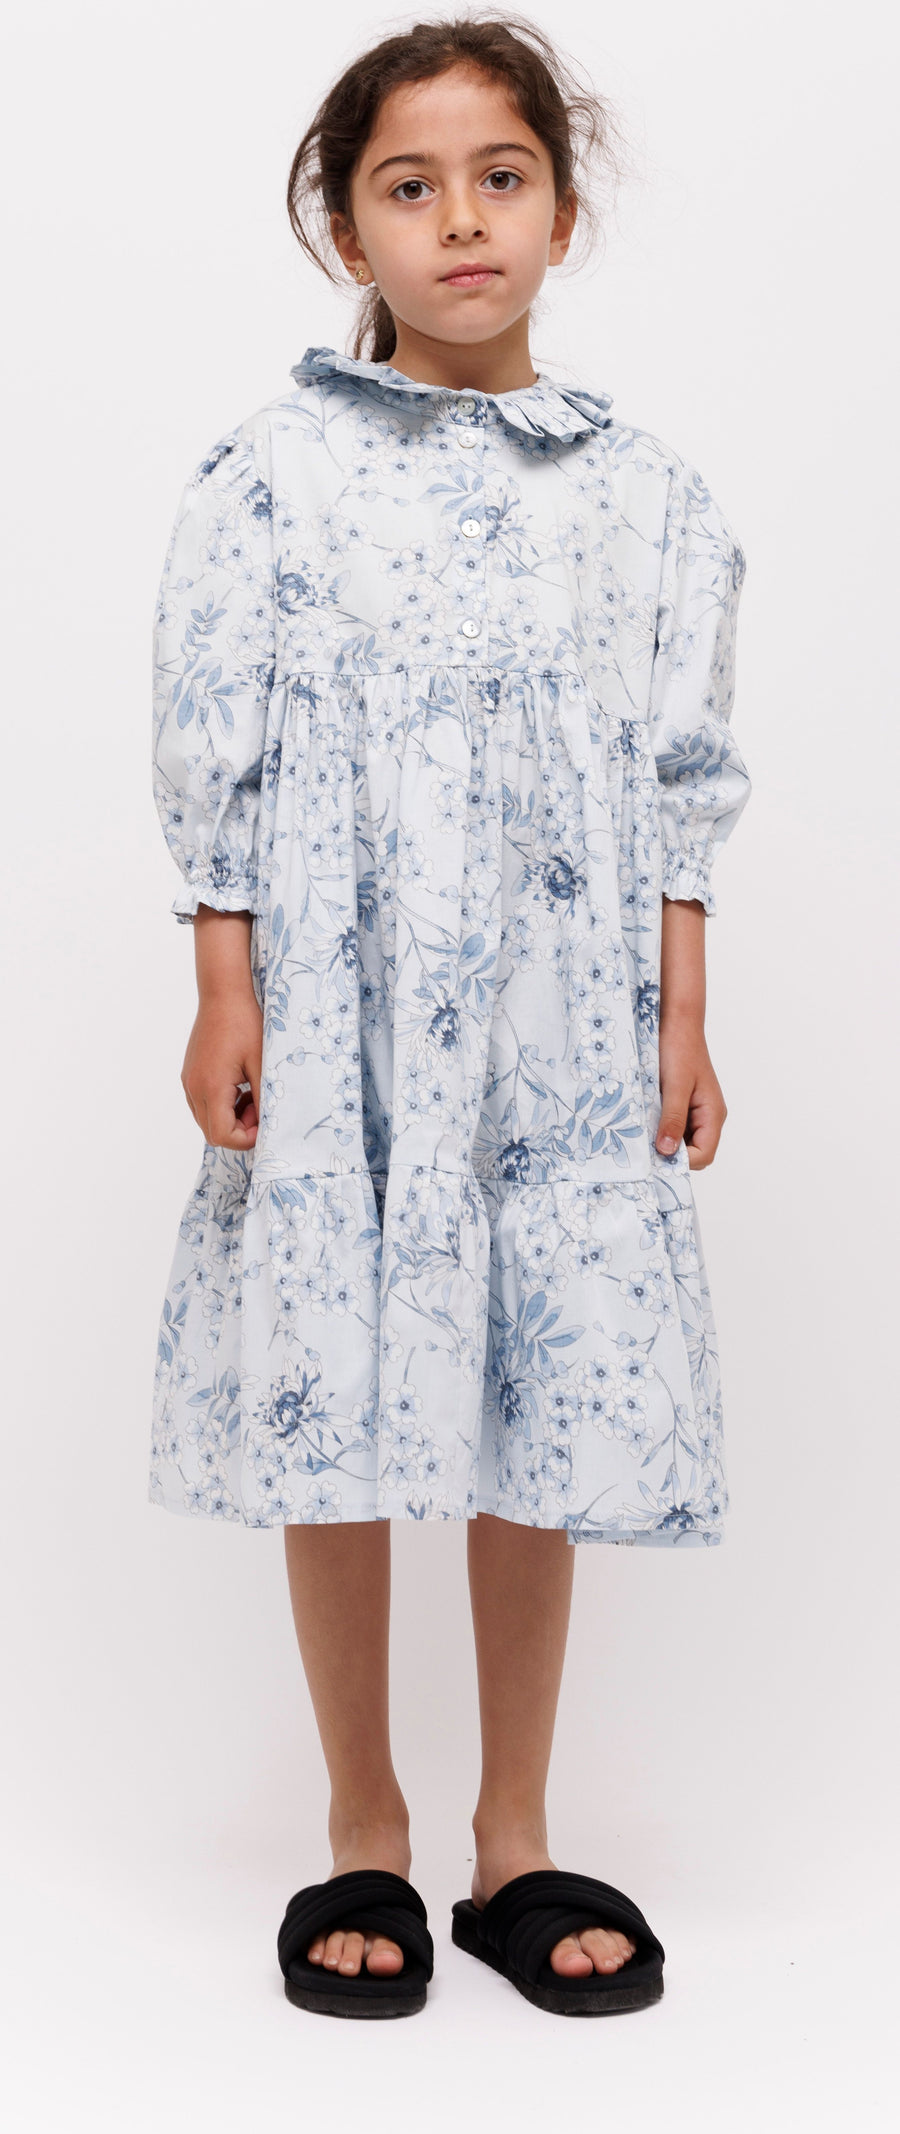 Collar Blue Floral Dress by Christina Rohde